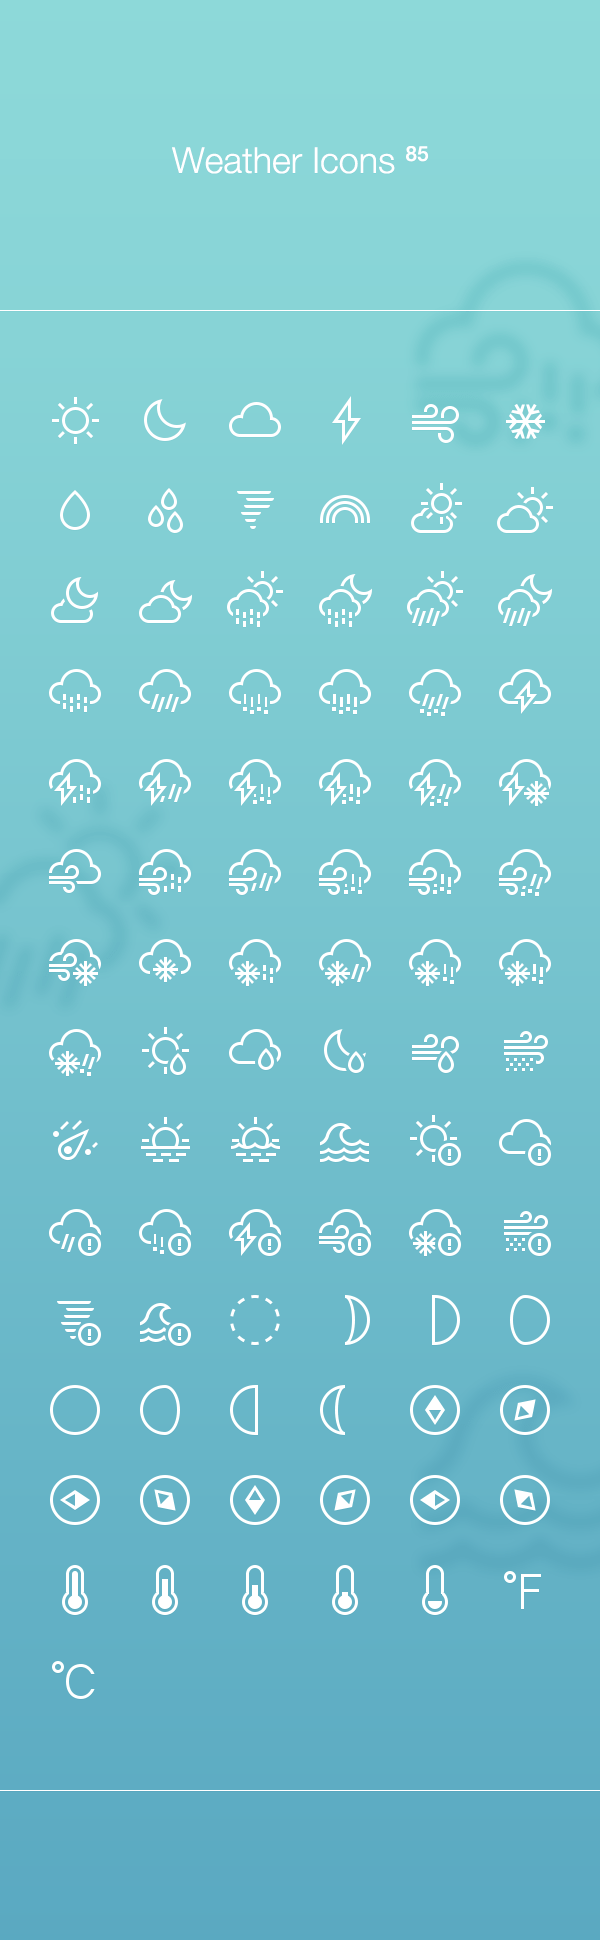 85 FREE Weather Icons